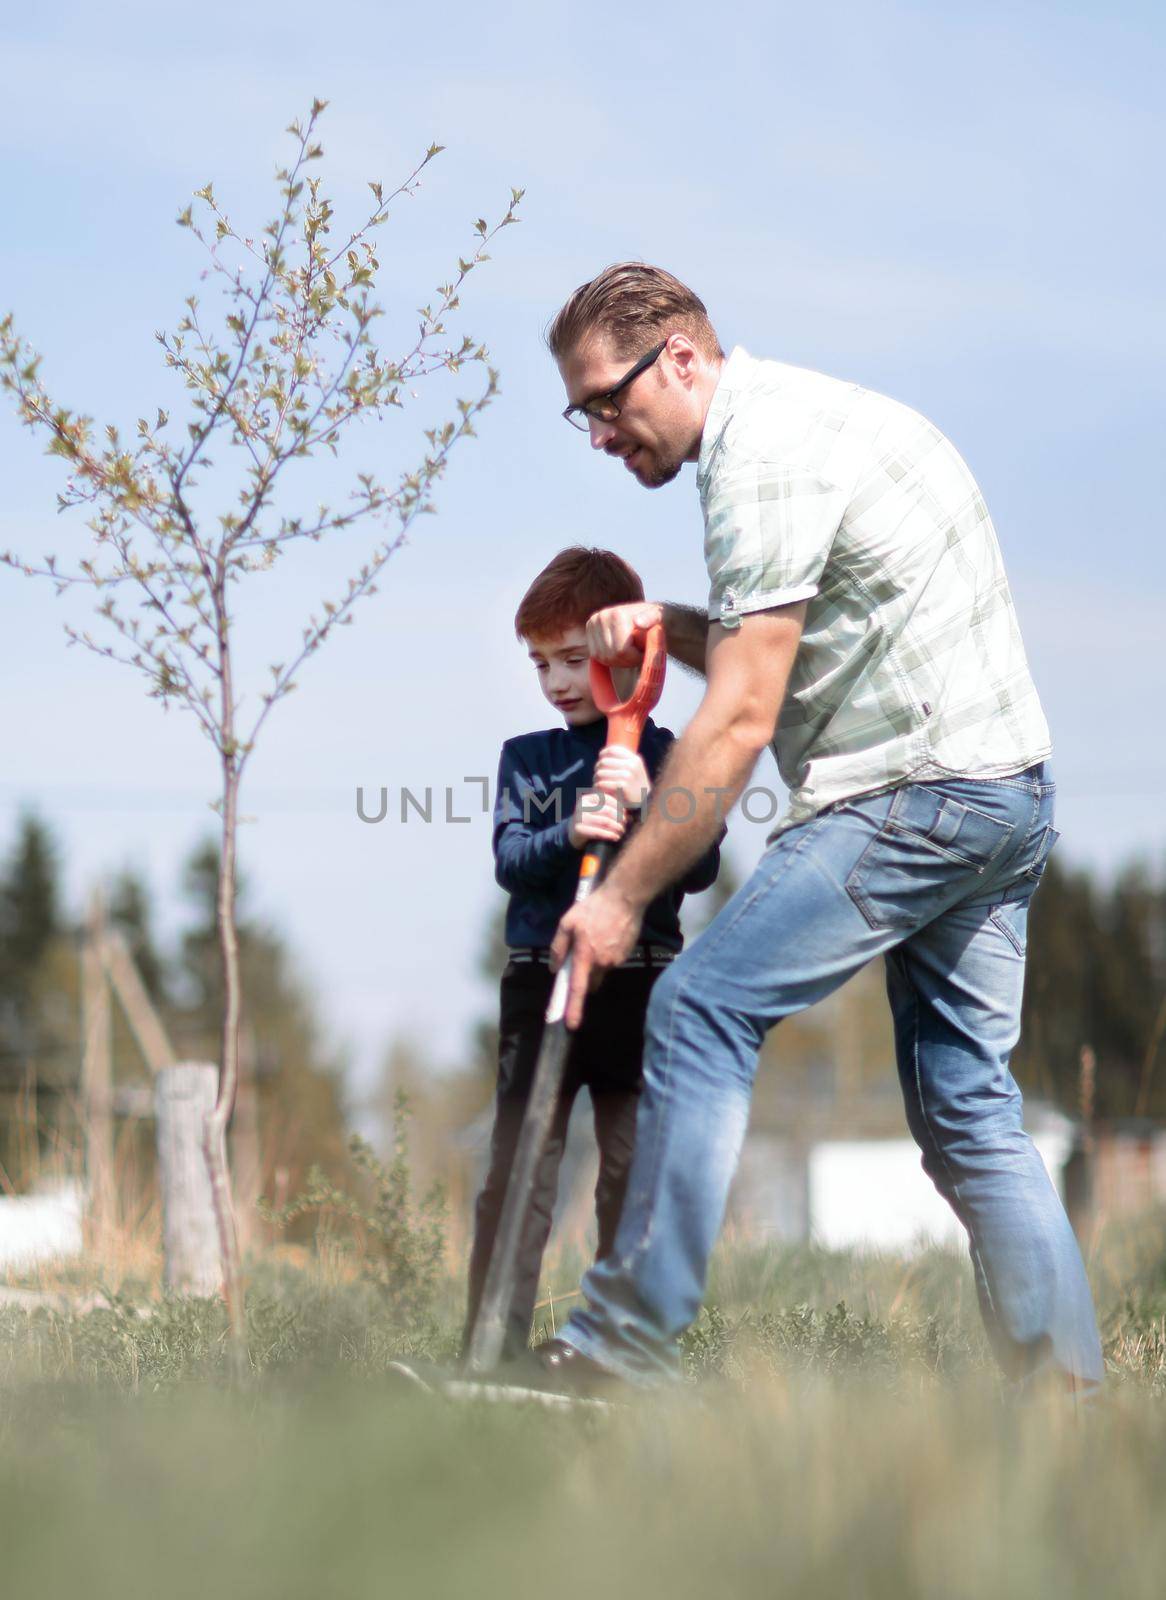 son and father plant a tree together .the concept of family education